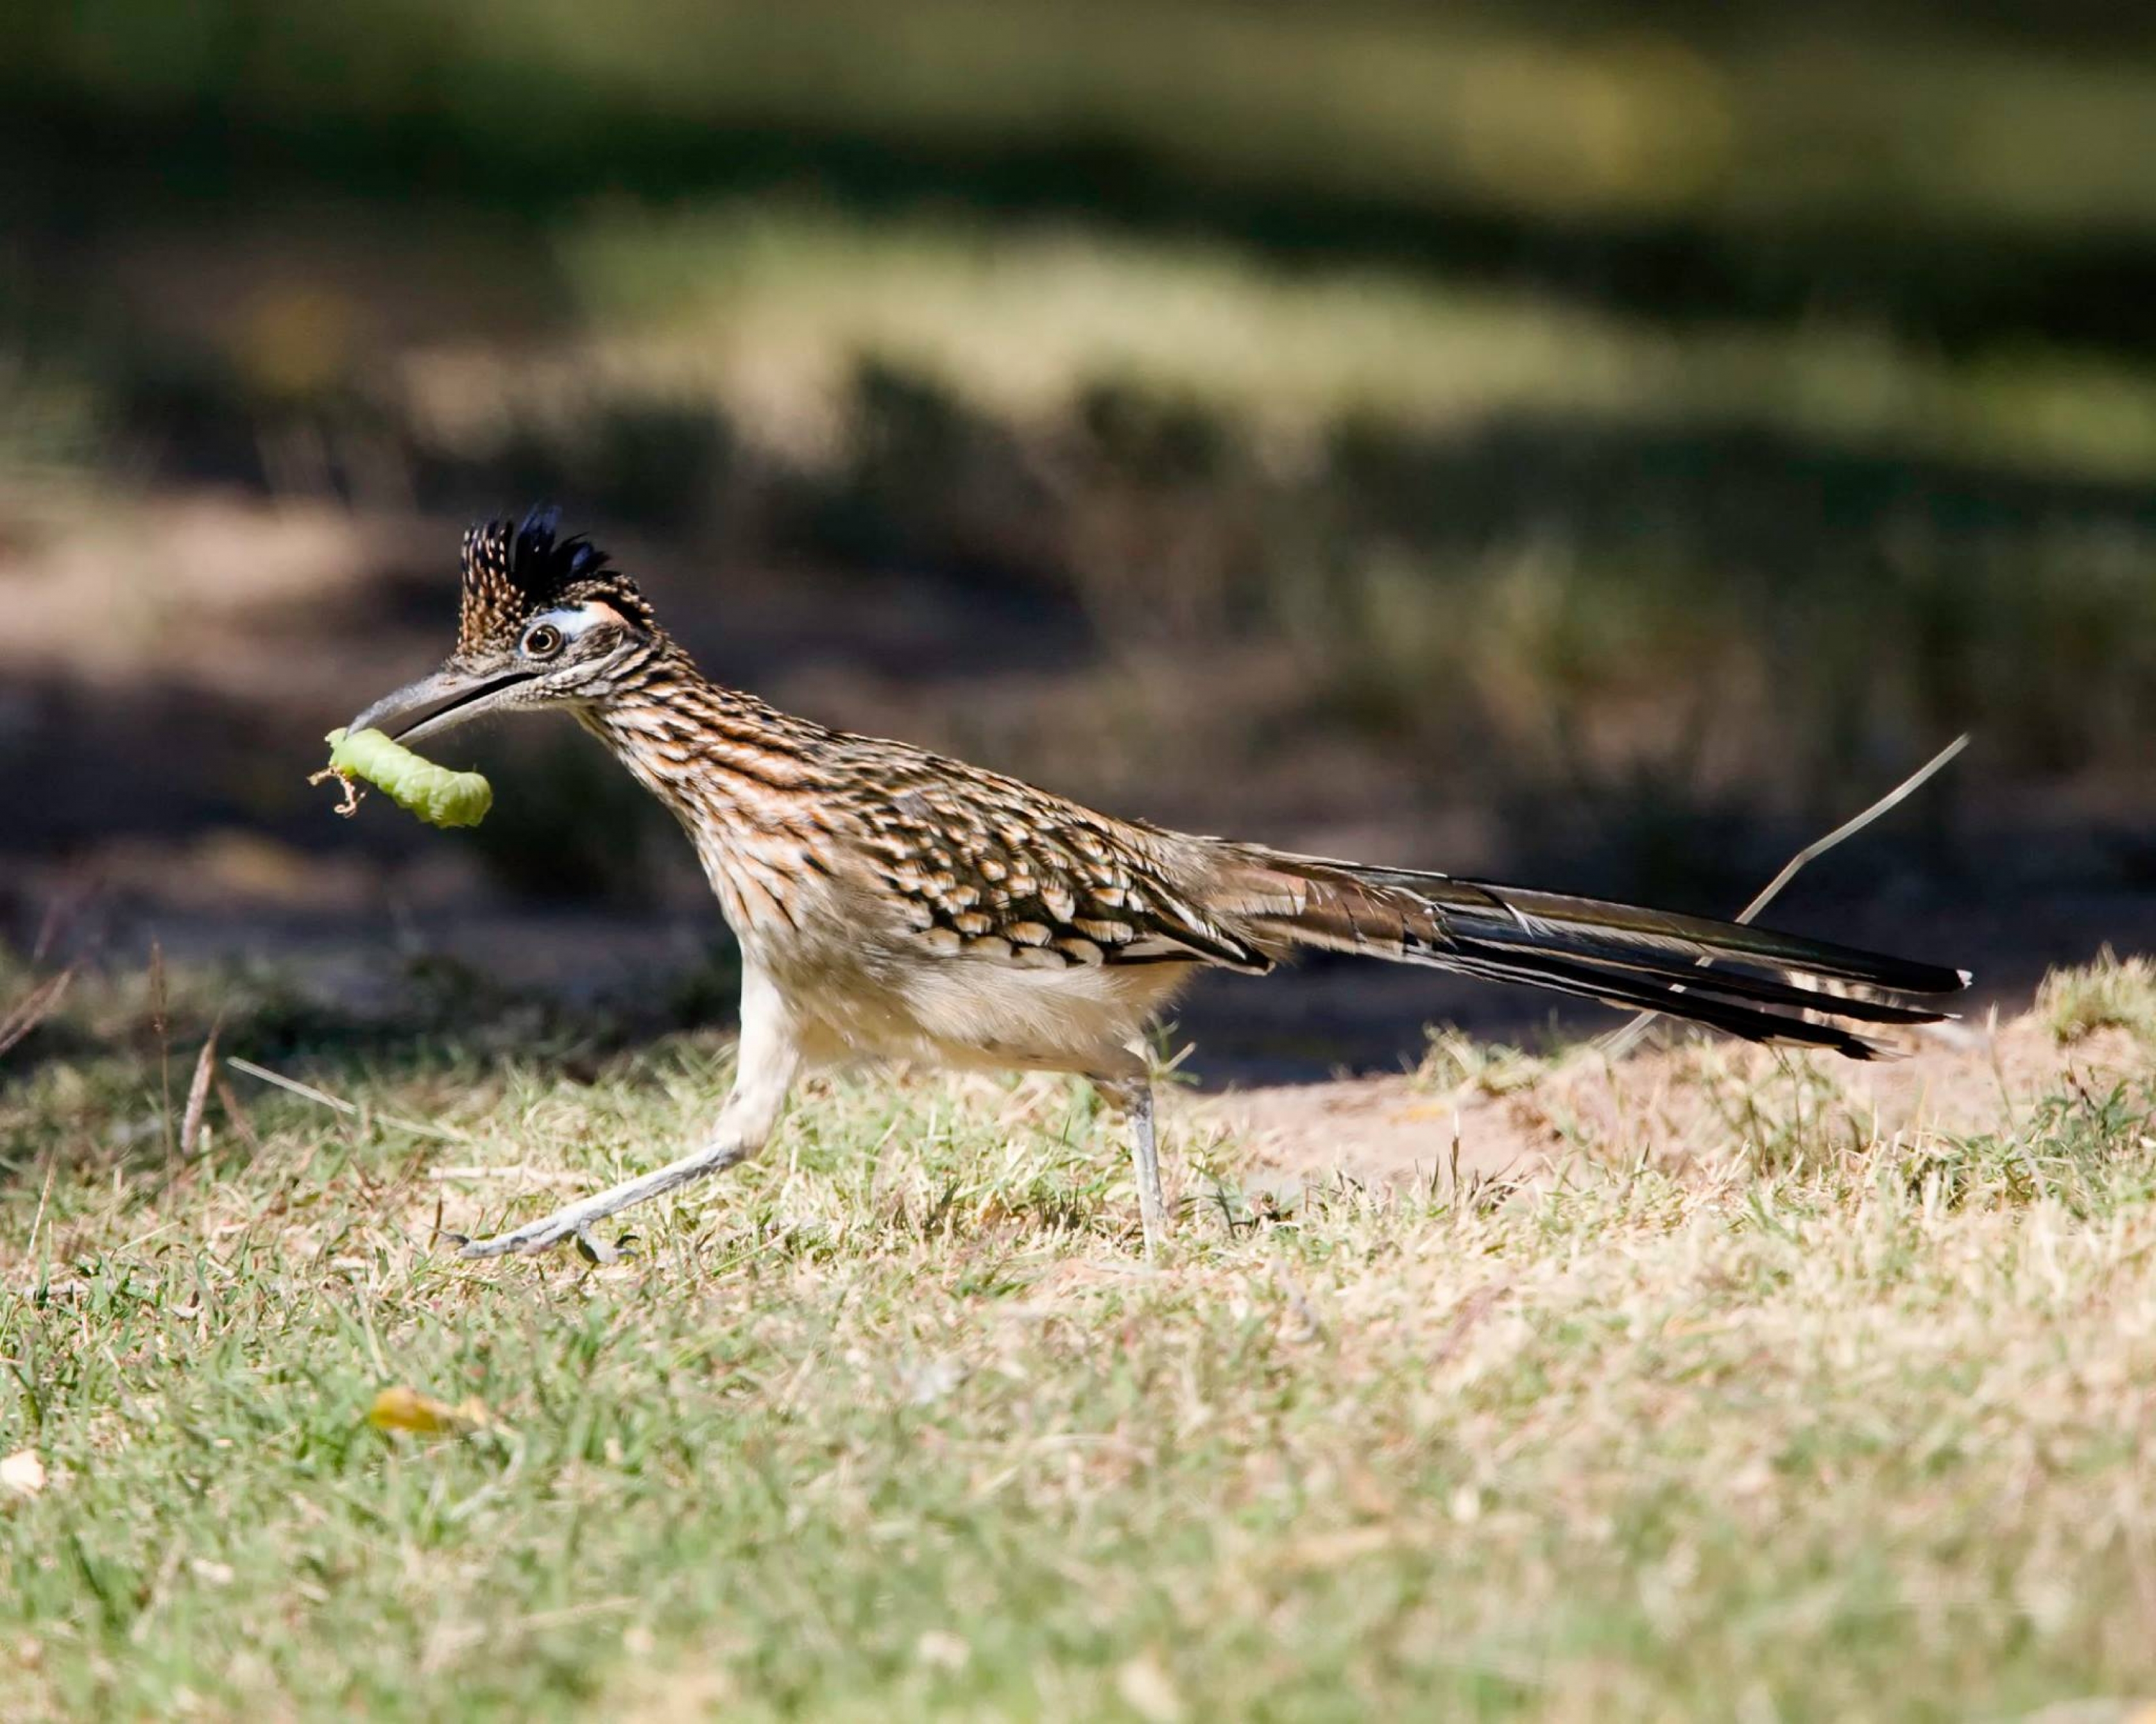 A roadrunner with a green caterpillar in its mouth running on the grass at Big Bend National Park